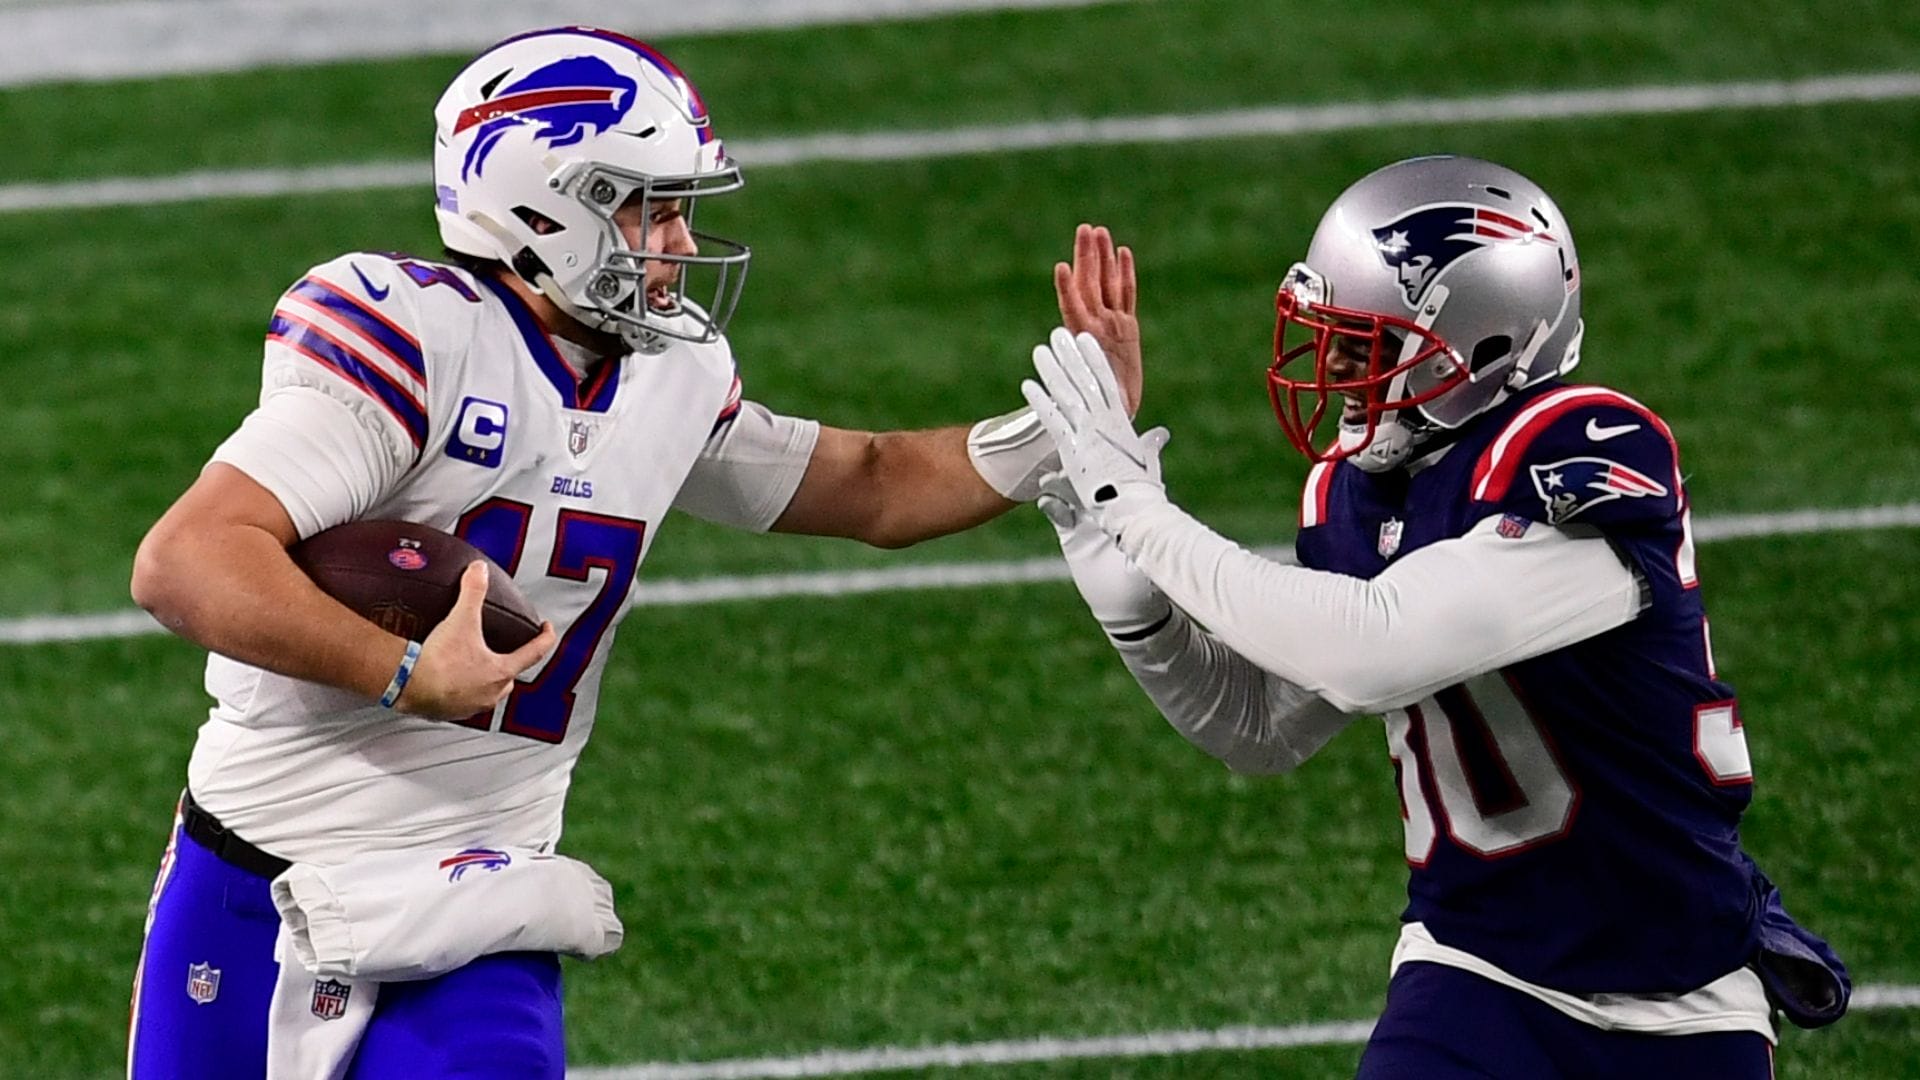 FOXBOROUGH, MASSACHUSETTS - DECEMBER 28: Josh Allen #17 of the Buffalo Bills runs the ball against Jason McCourty #30 of the New England Patriots at Gillette Stadium on December 28, 2020 in Foxborough, Massachusetts. (Photo by Maddie Malhotra/Getty Images)